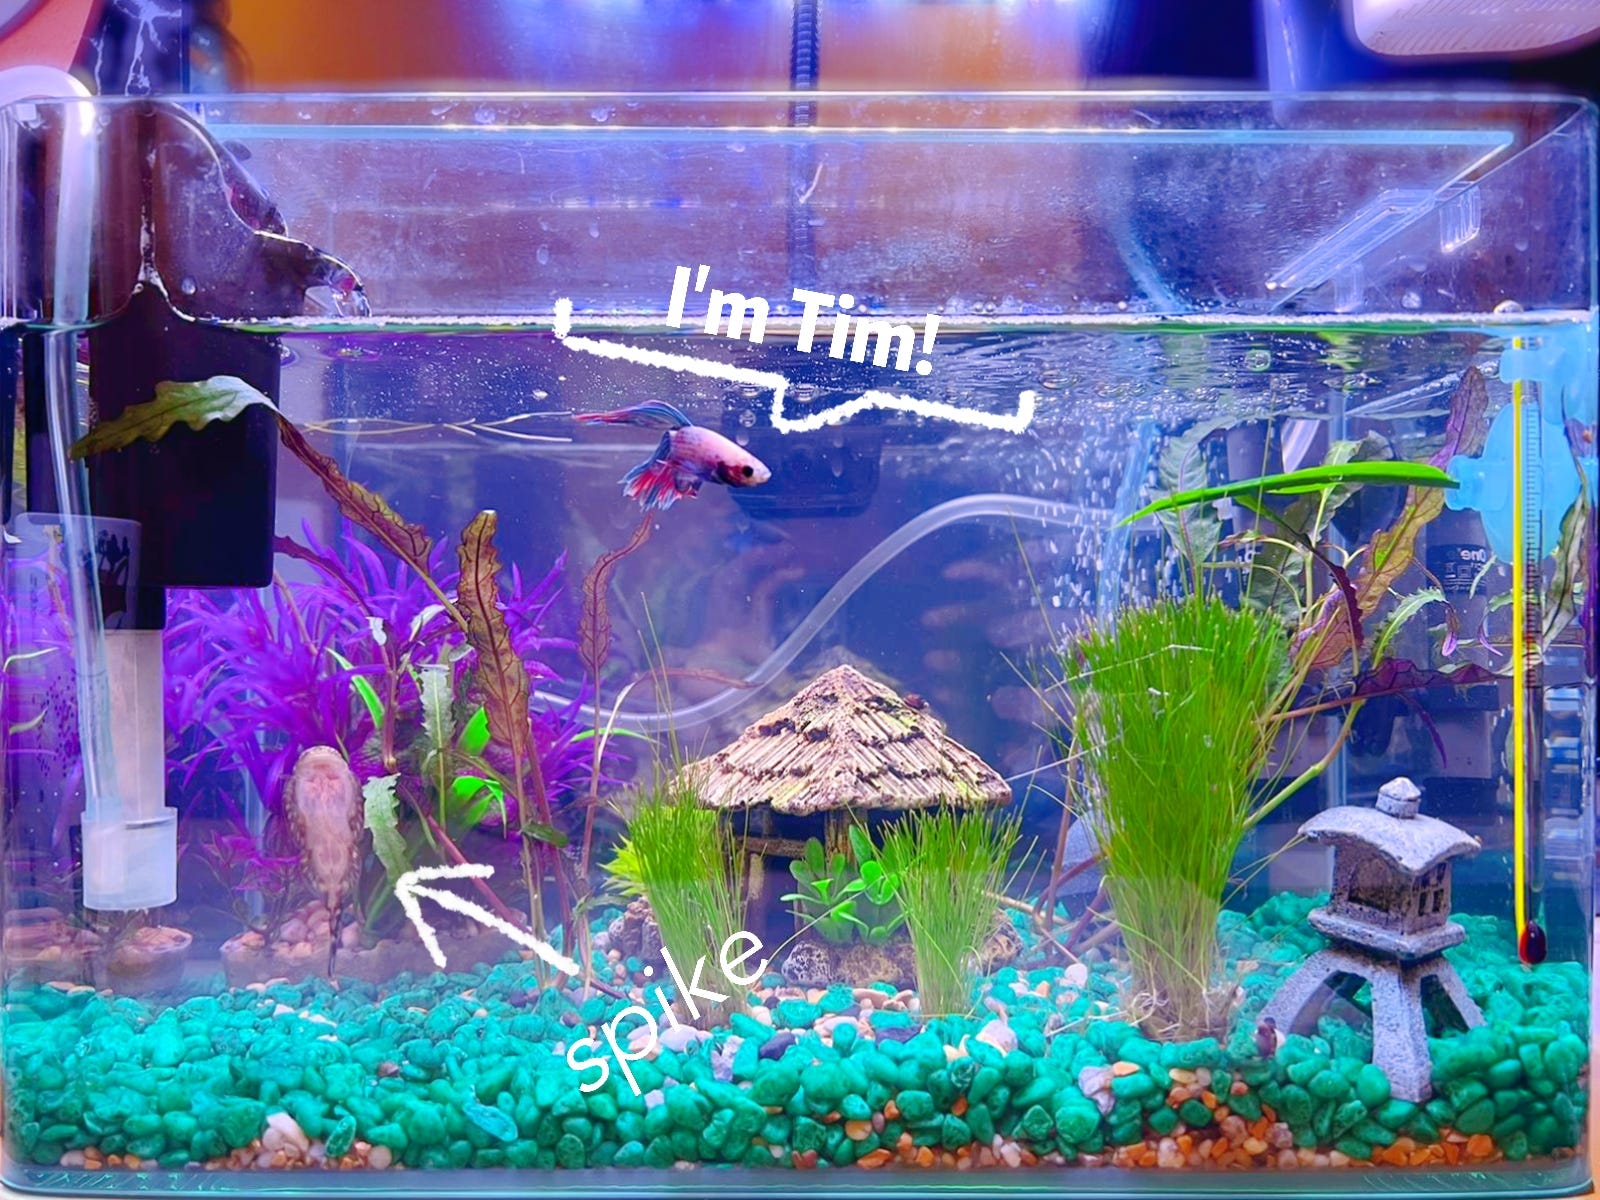 5 Good Reasons to Have an Aquarium, by Jess the Avocado